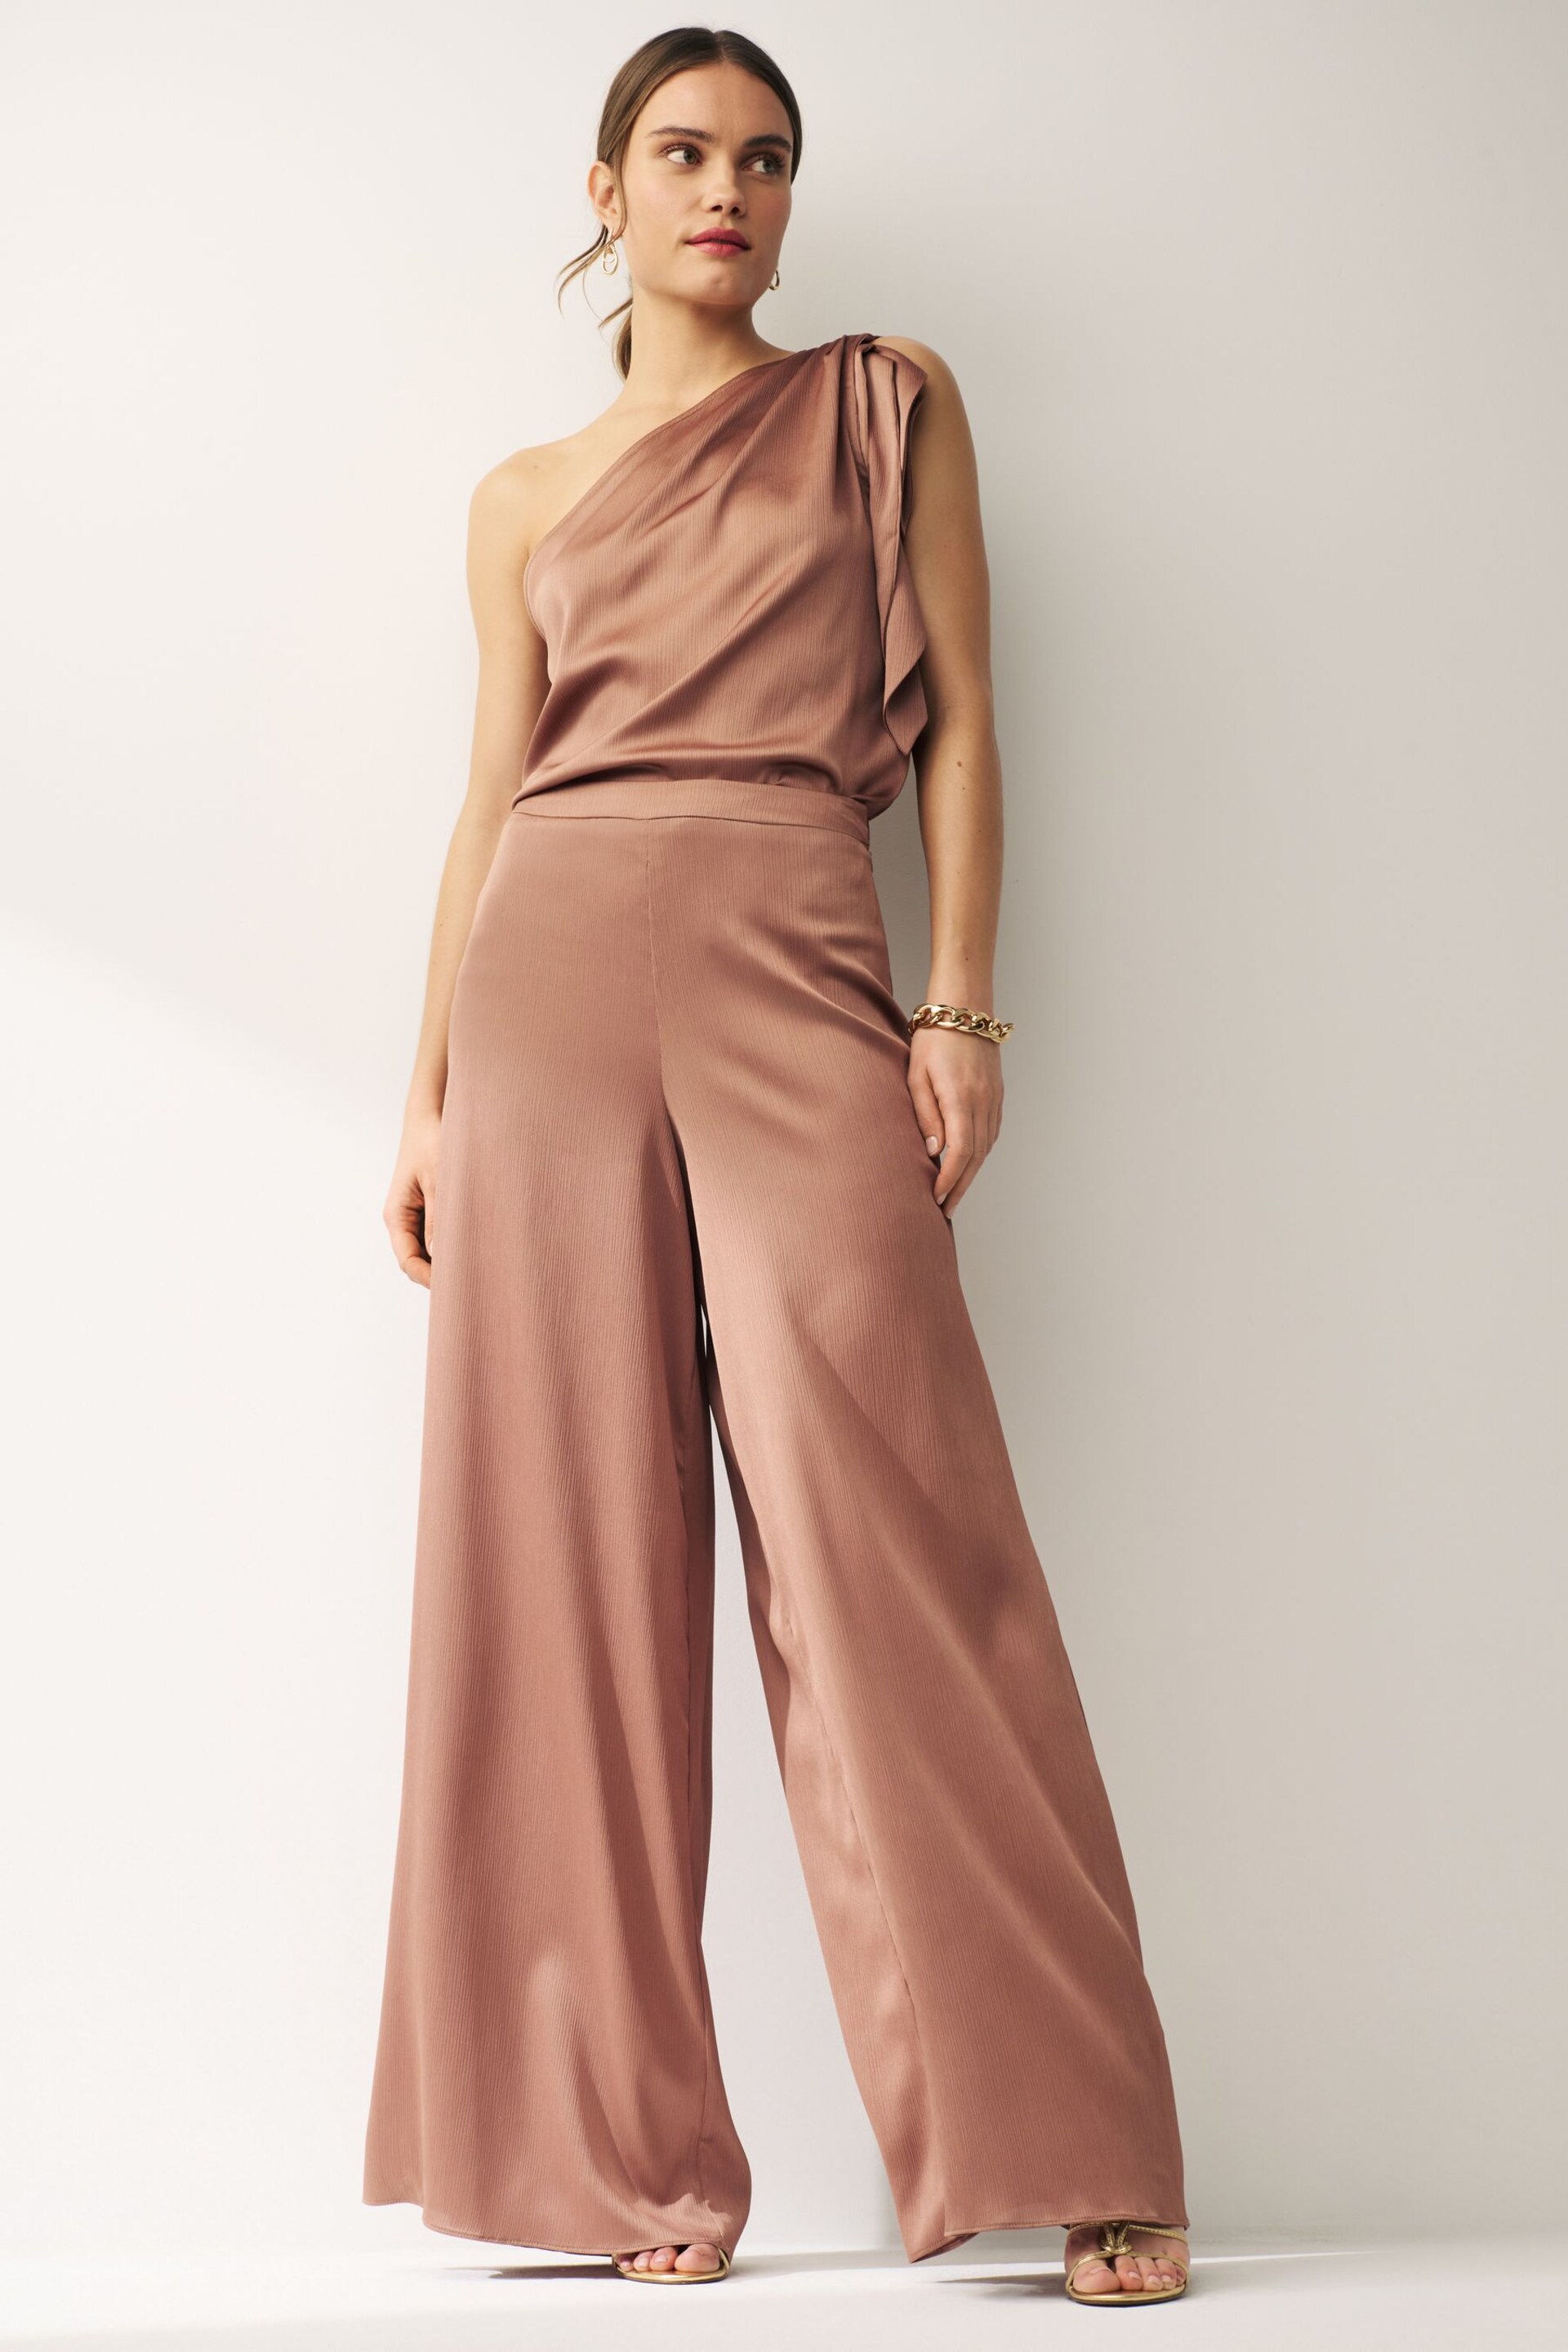 Emme Marella Eretto Wide Leg Satin Brown Trousers - Image 1 of 2